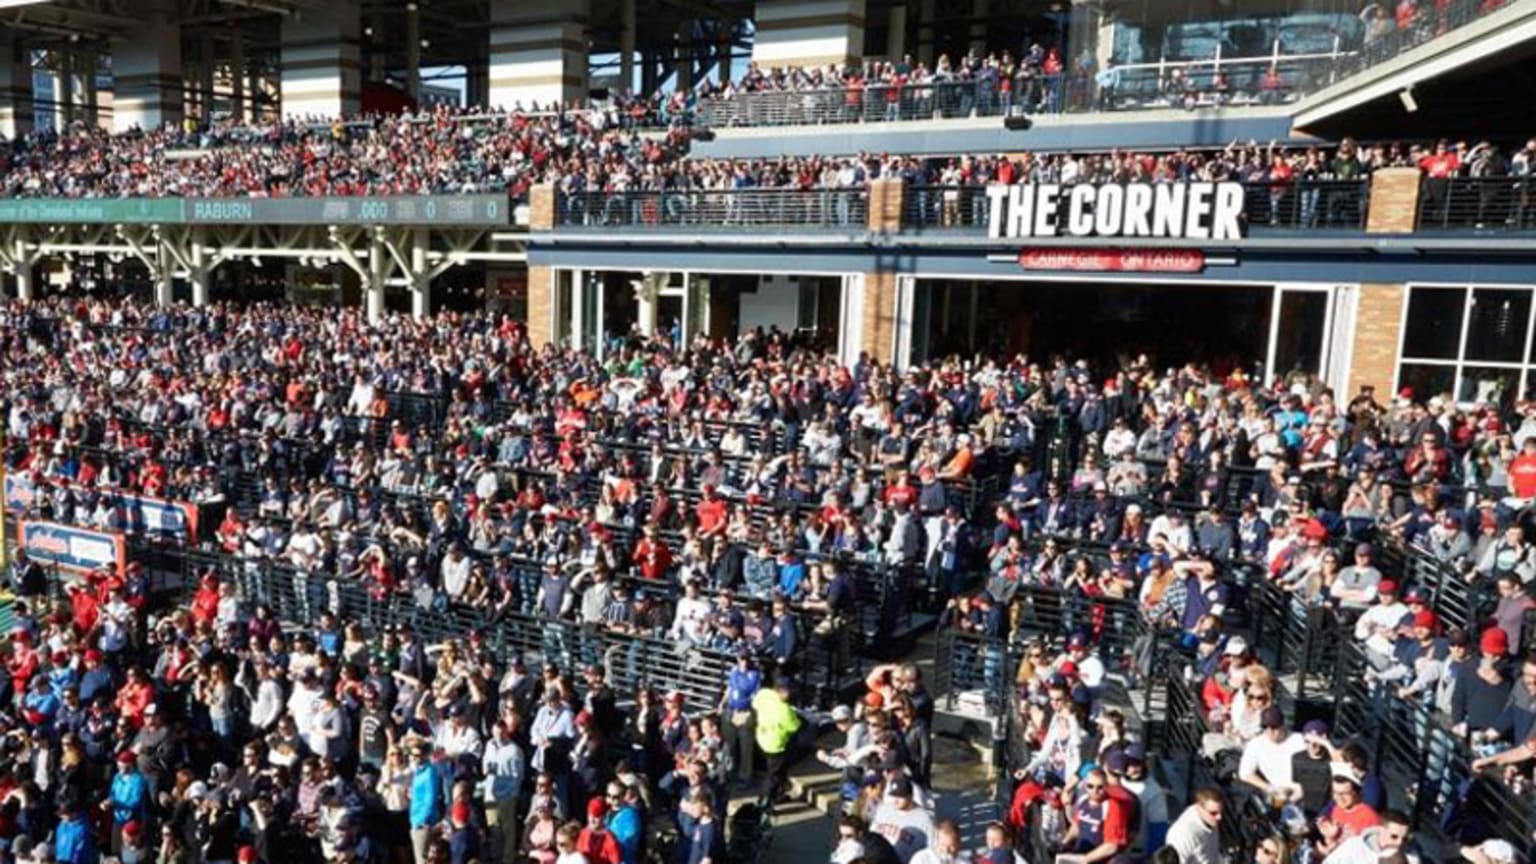 Standing Room Only Tickets at Target Field 